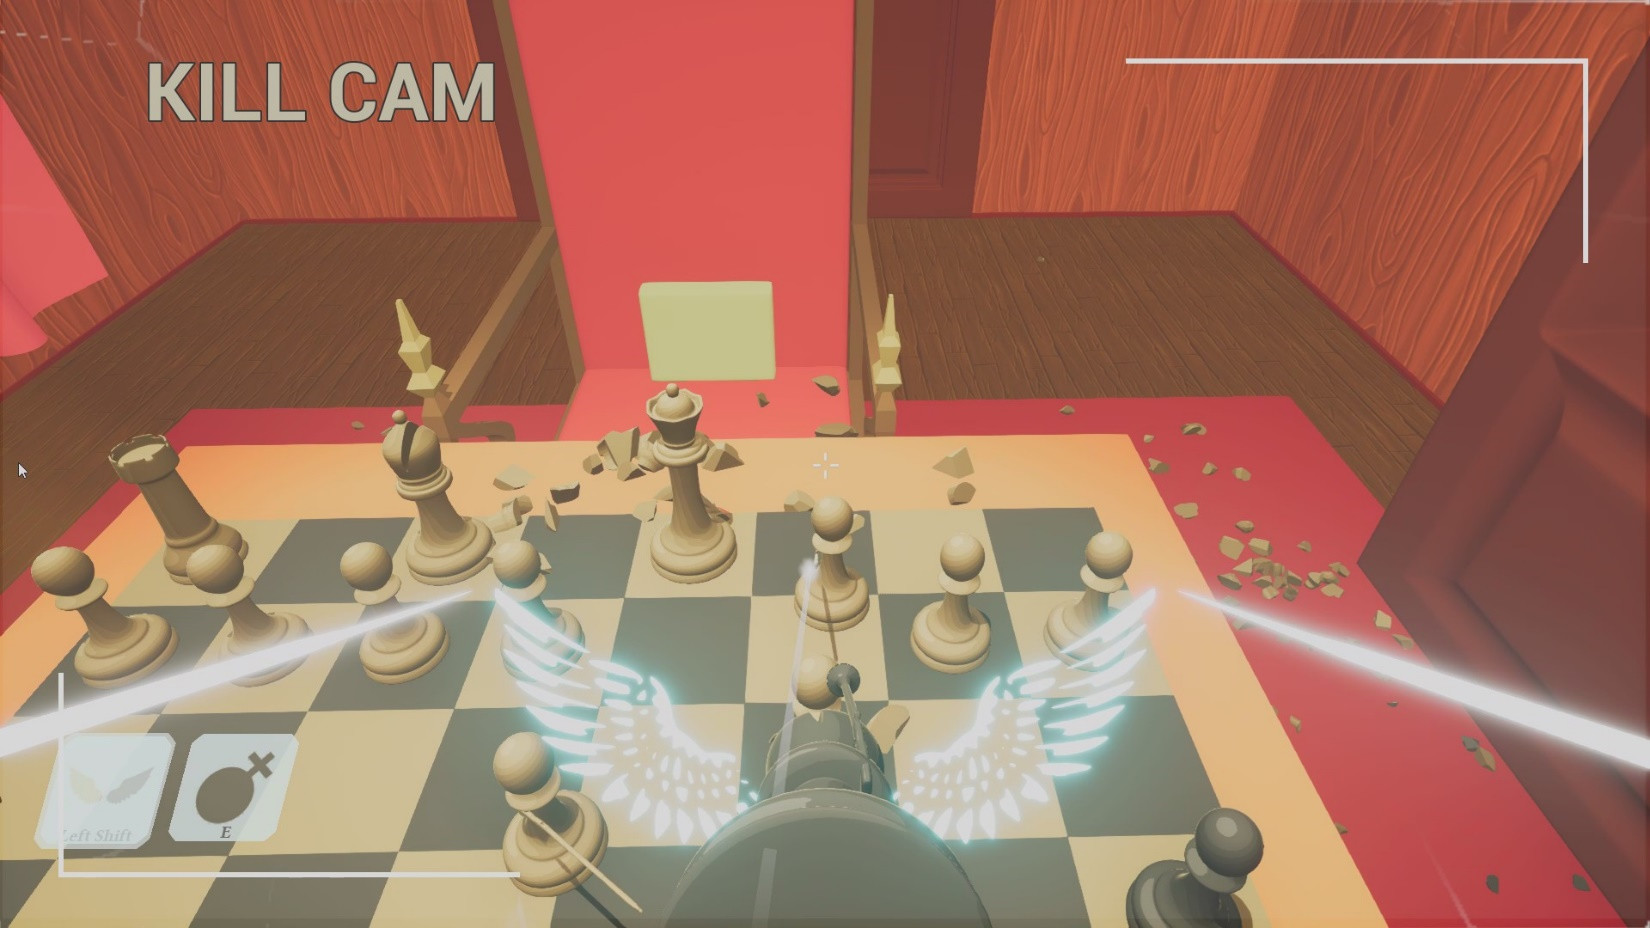 FPS Chess - Version 1.1.0 · FPS Chess update for 4 February 2023 · SteamDB